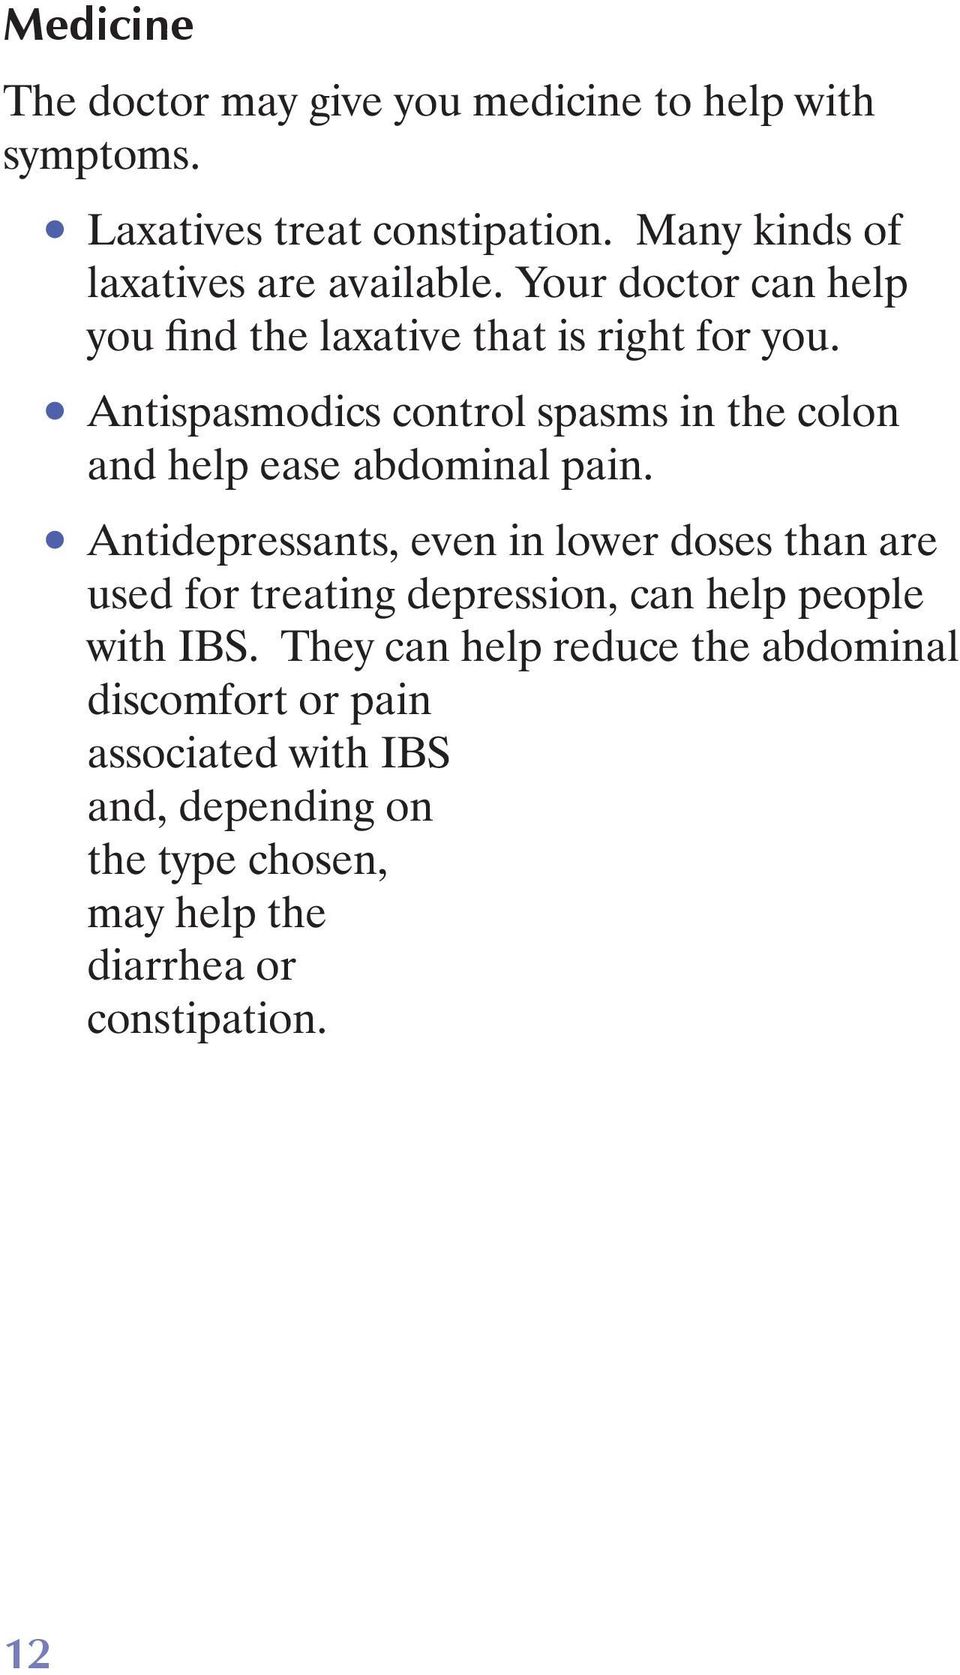 Antispasmodics control spasms in the colon and help ease abdominal pain.